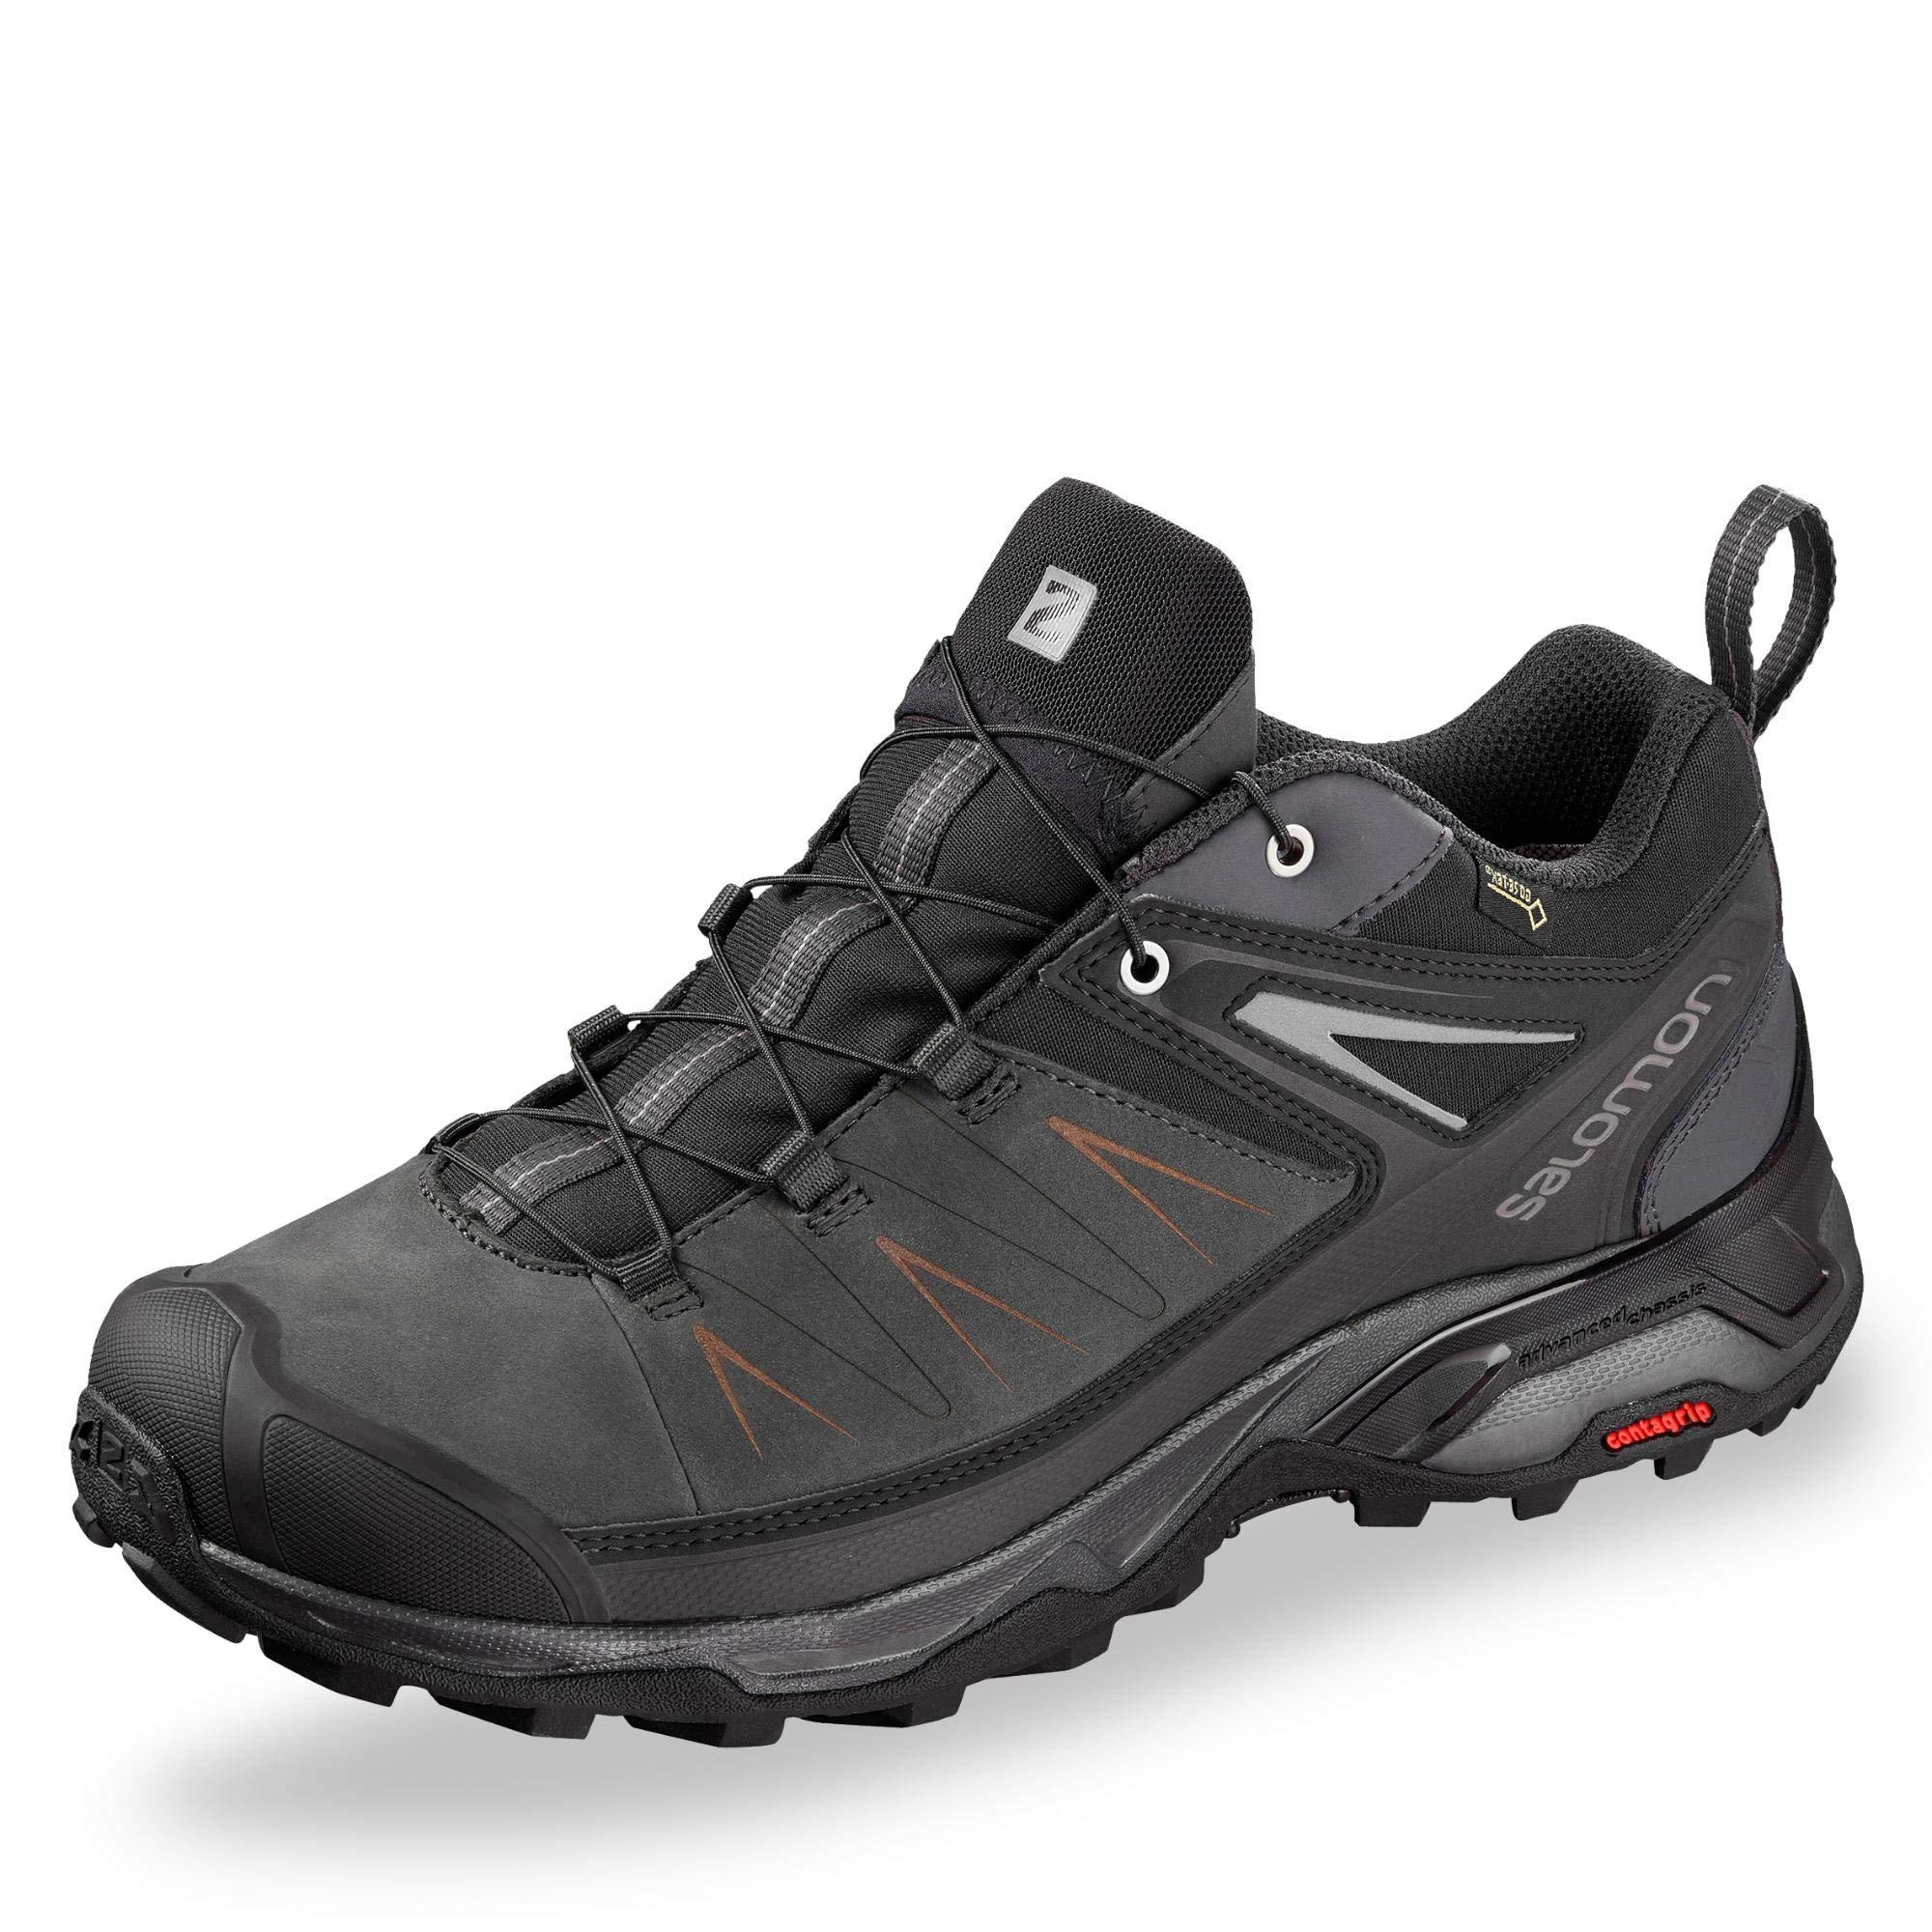 Salomon Leather X Ultra 3 Ltr Gtx Hiking Shoes in Black for Men - Save 25%  - Lyst